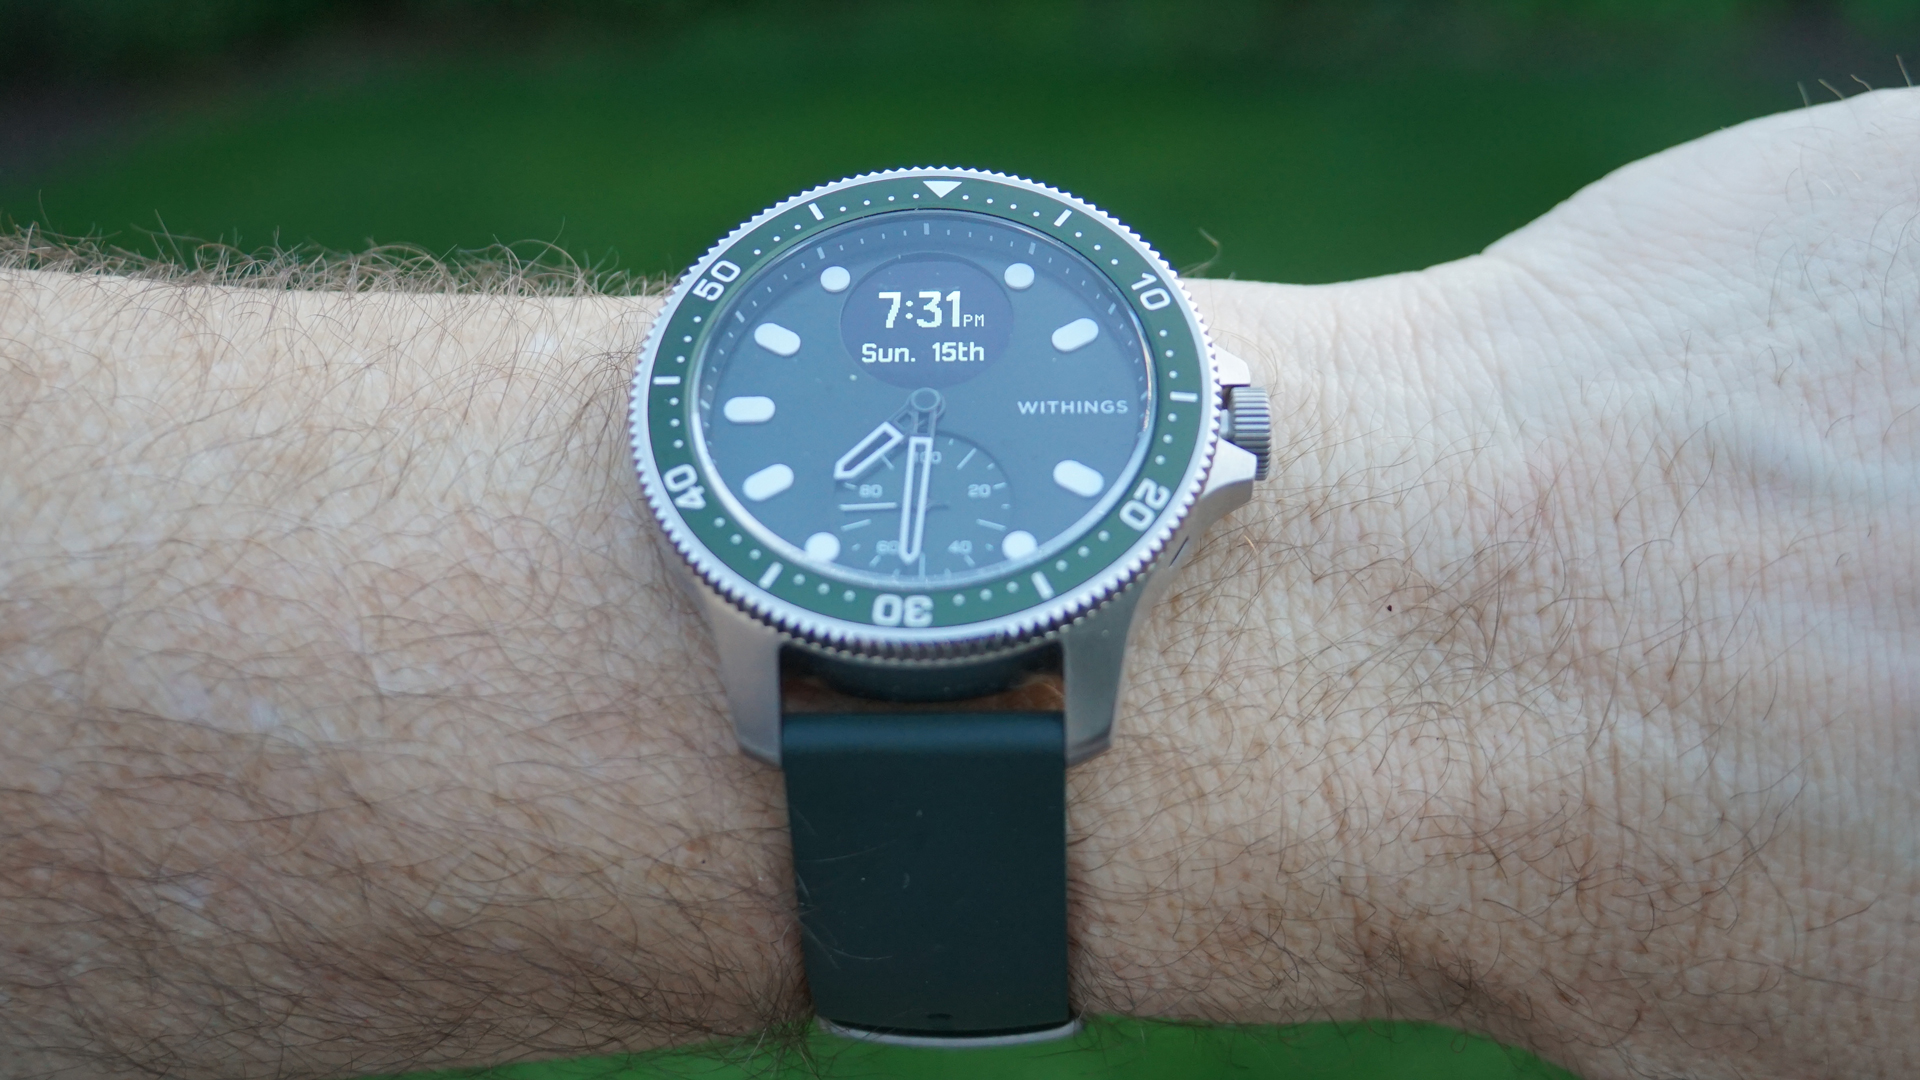 Withings ScanWatch Horizon review